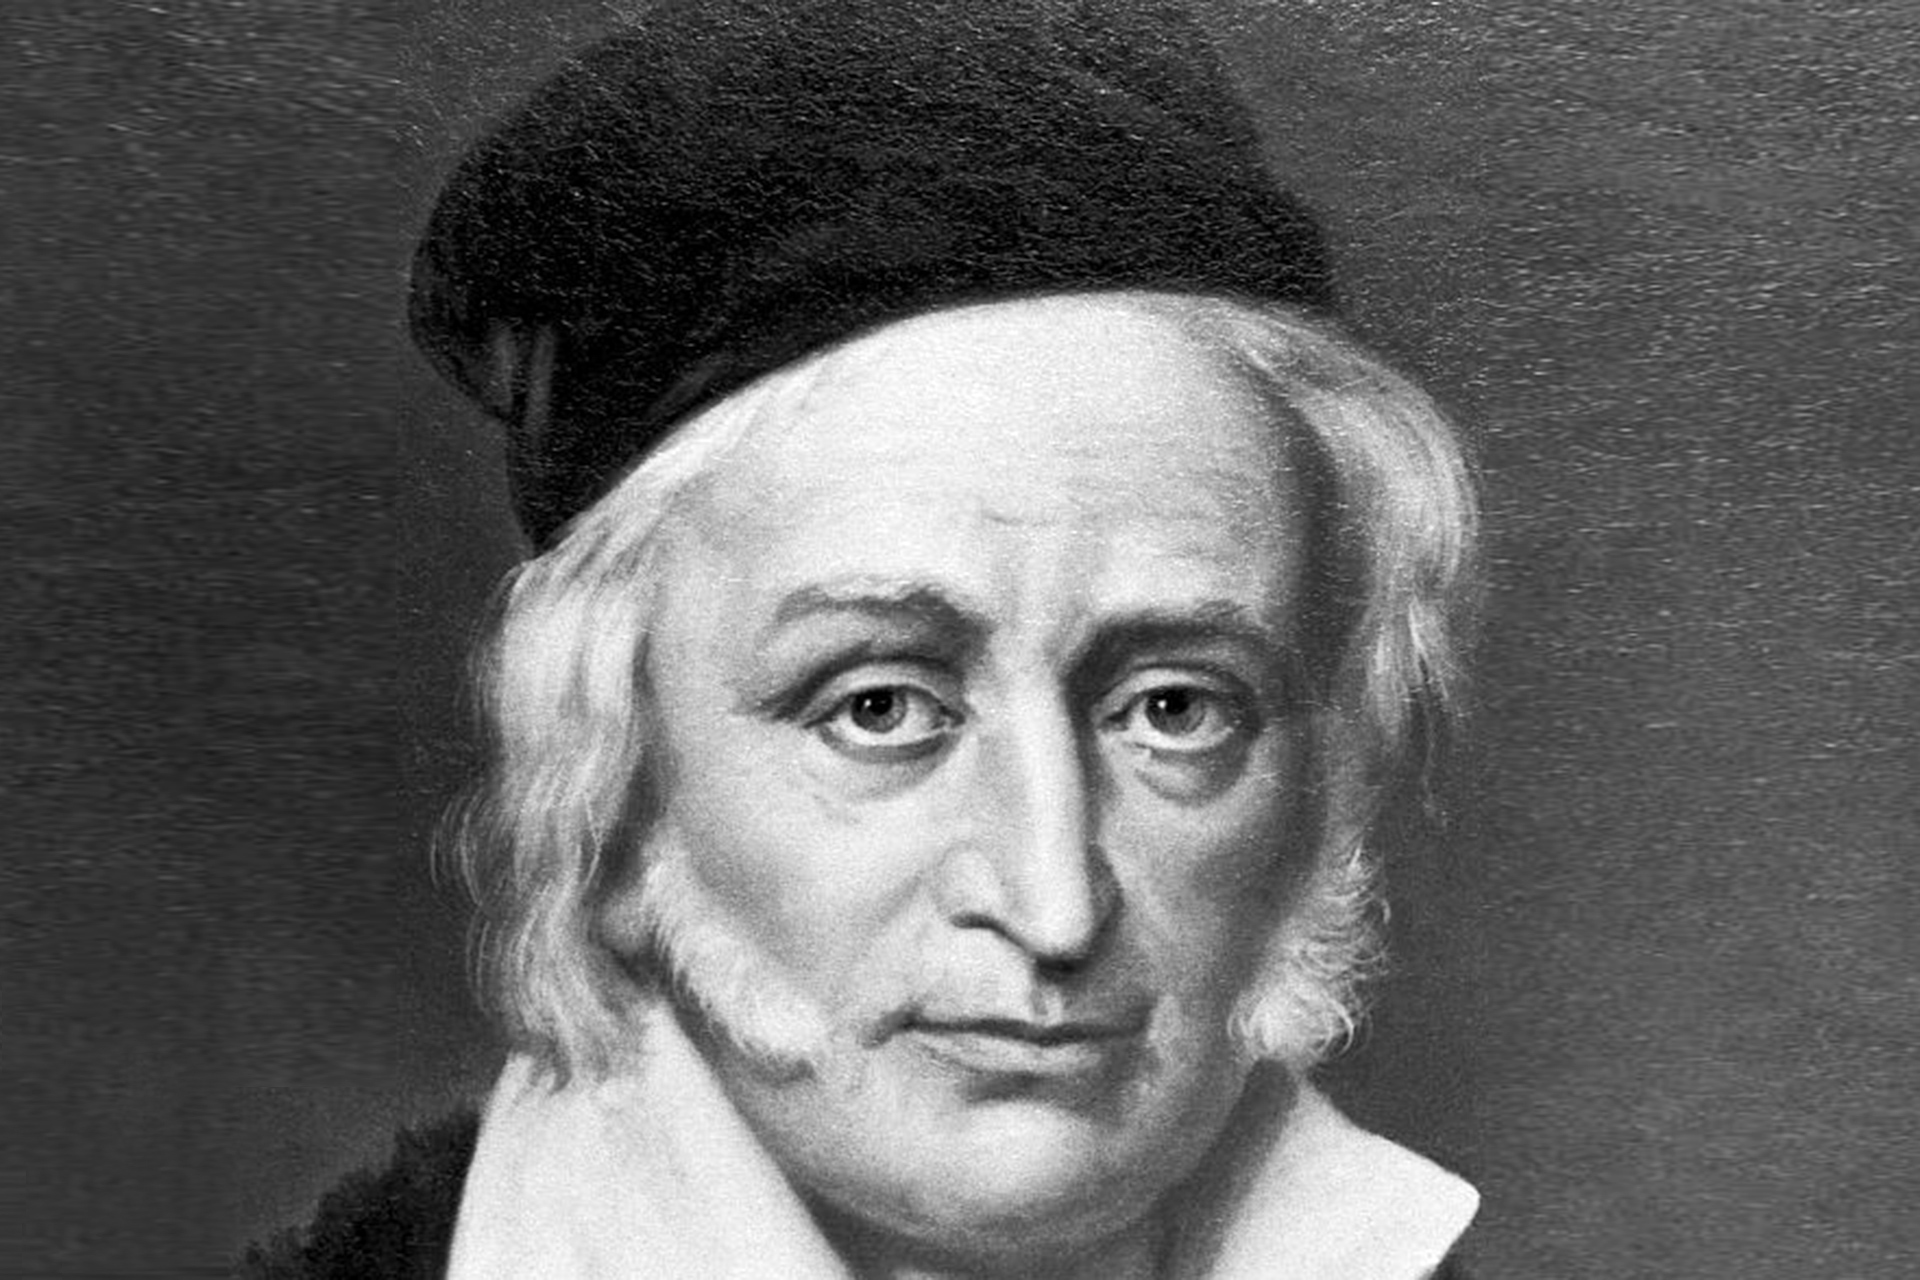 Carl Gauss.. “Prince of Mathematics” Germany honored with his image on one of its coins |  encyclopedia